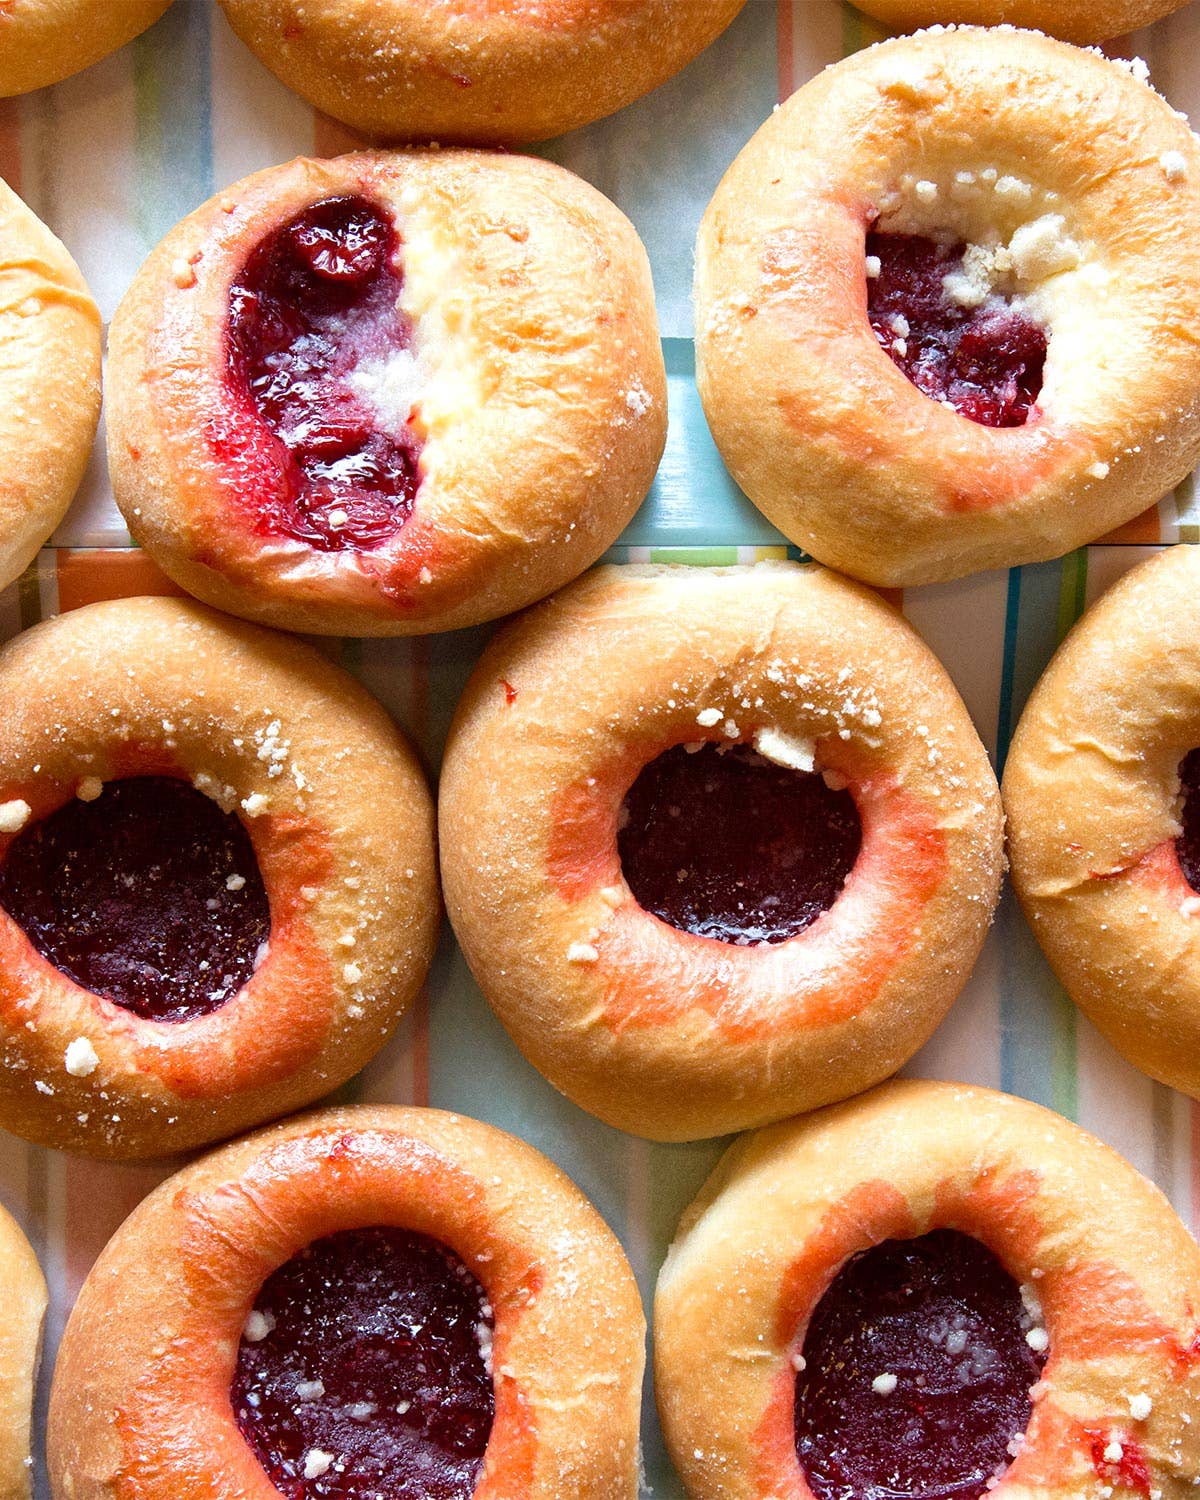 Kolaches Are the Texas Breakfast Staple Worth a Trip to the Lone Star State